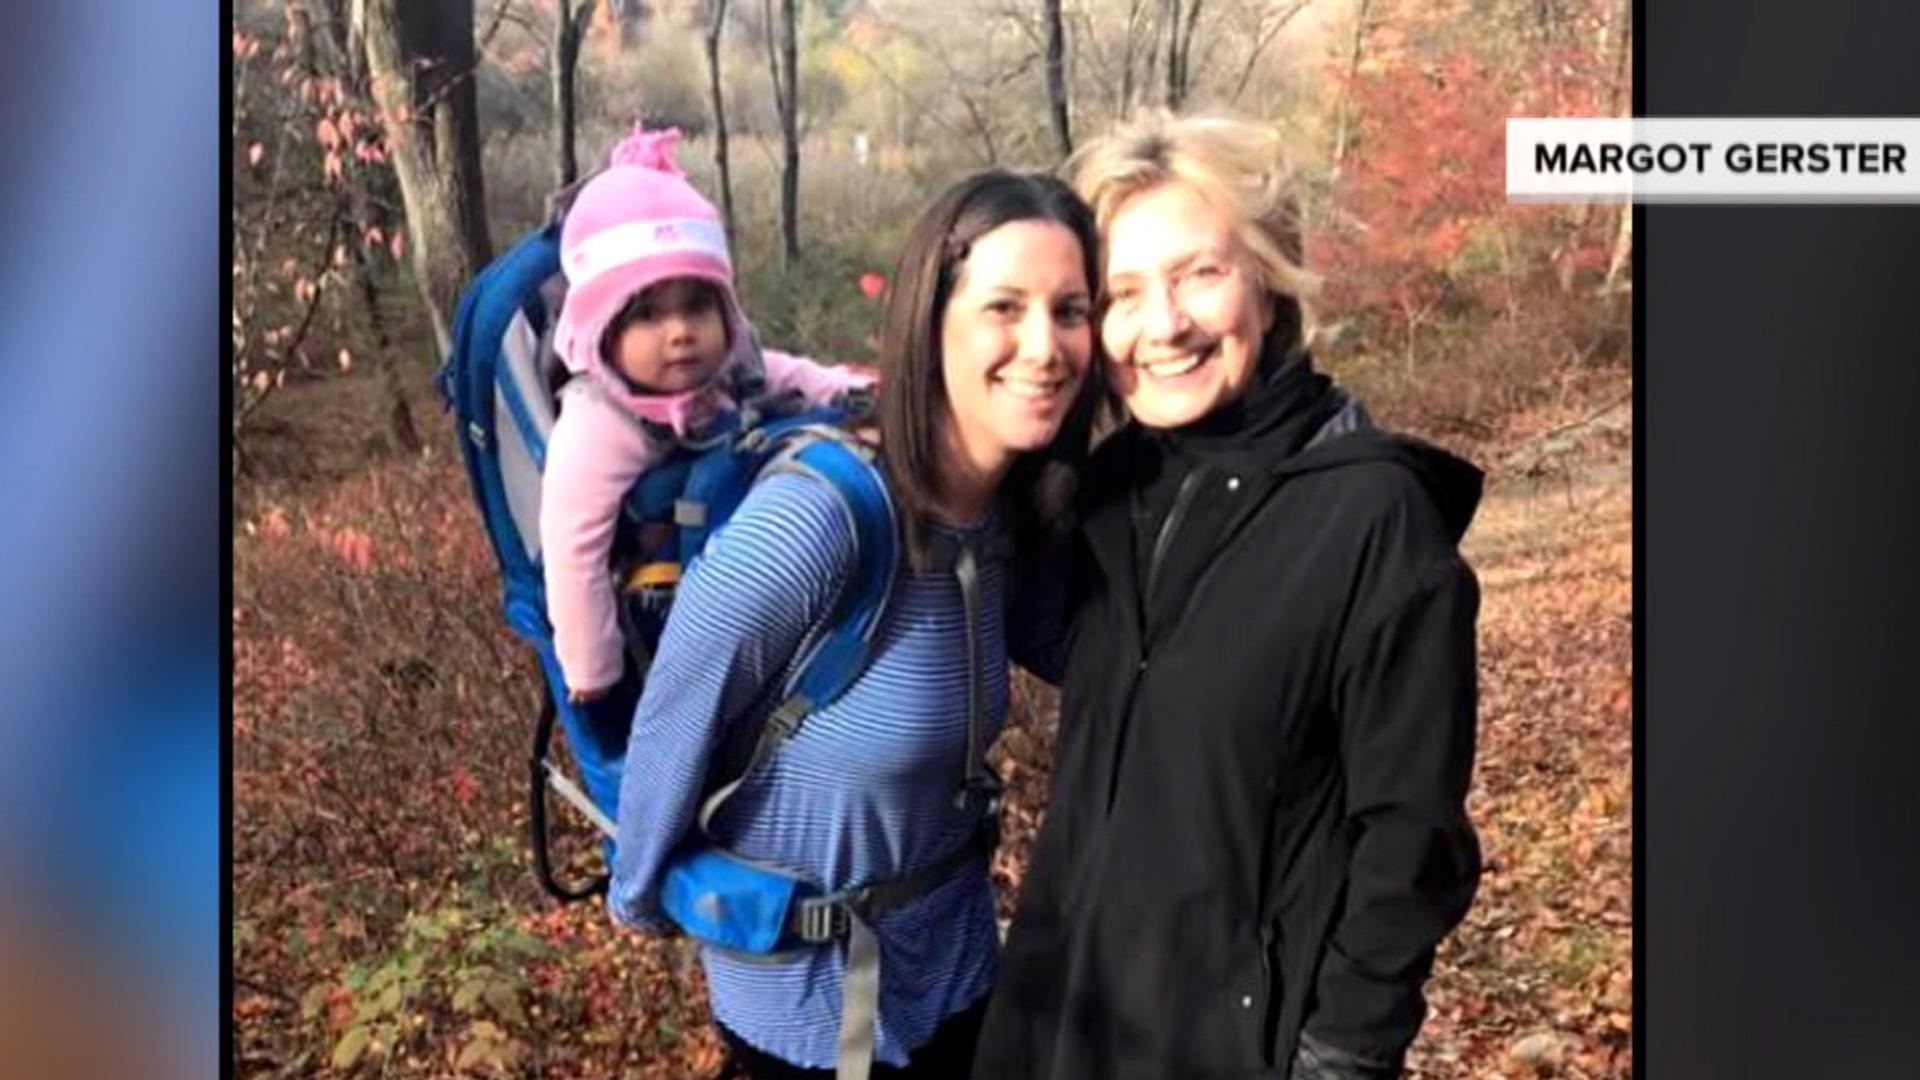 Hillary Clinton 'smiling and happy' after being spotted on a hiking trail